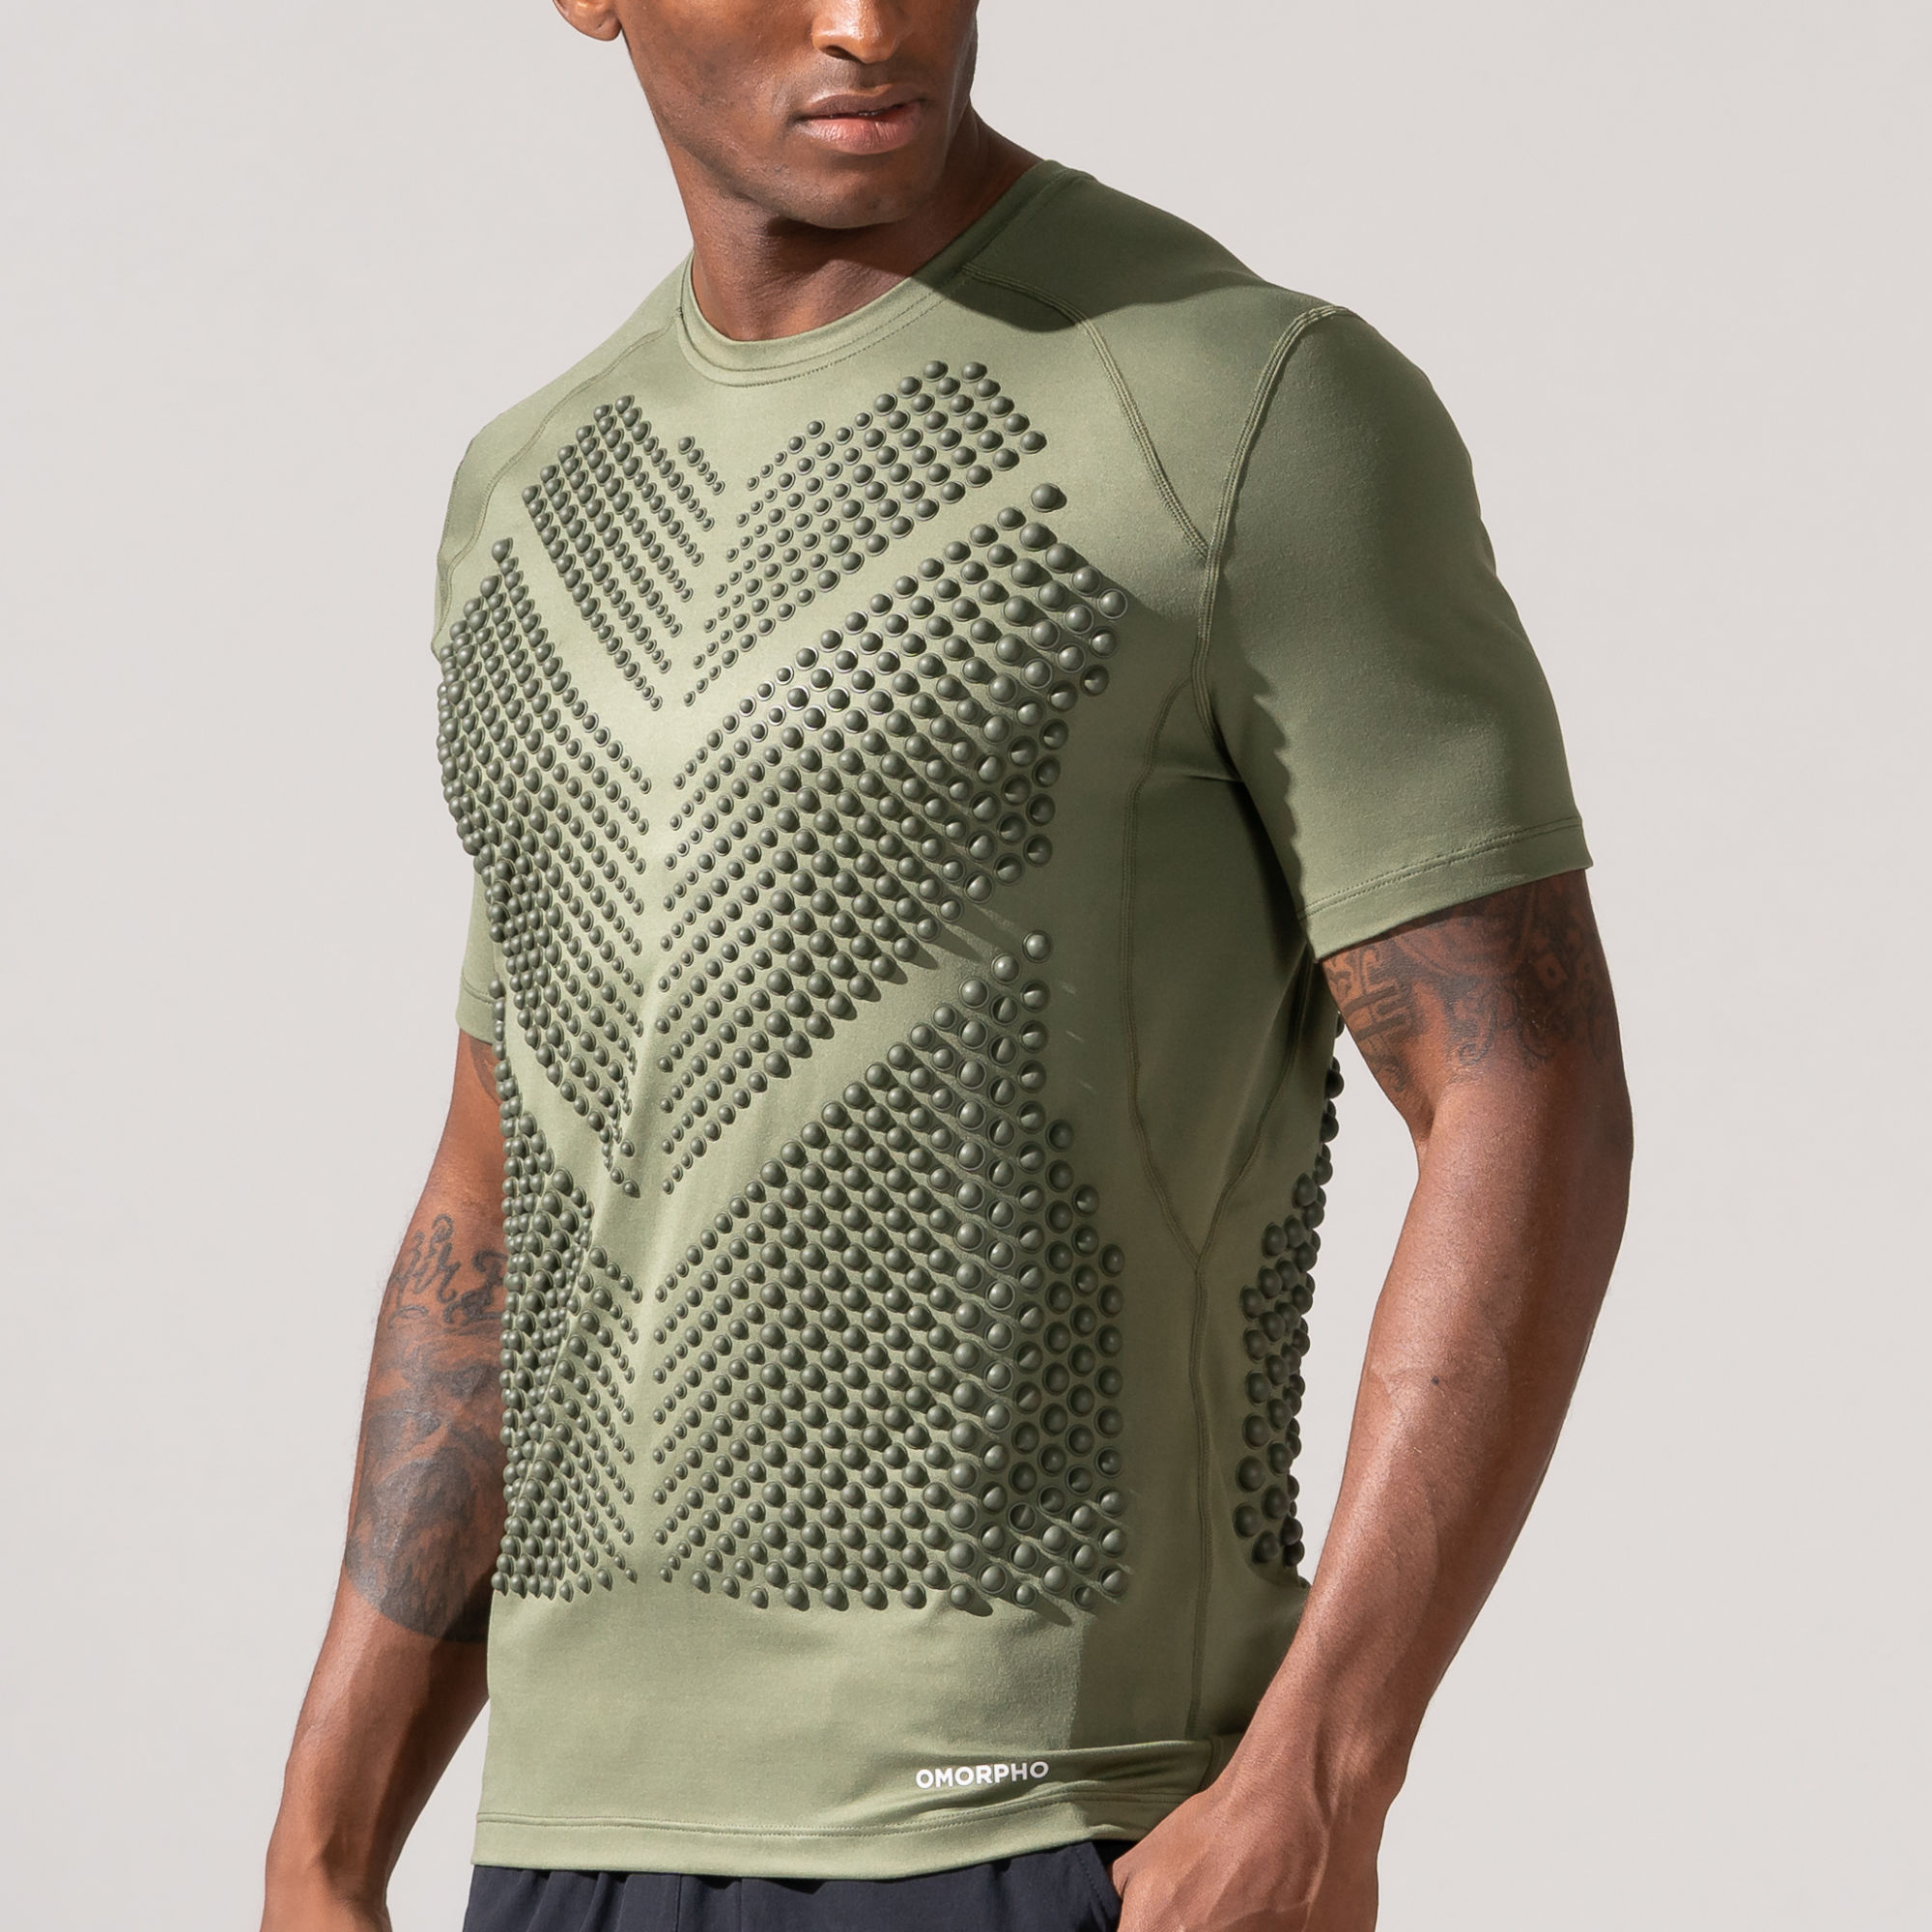 OMORPHO M G-Top SS Olive weighted short sleeve shirt - front torso